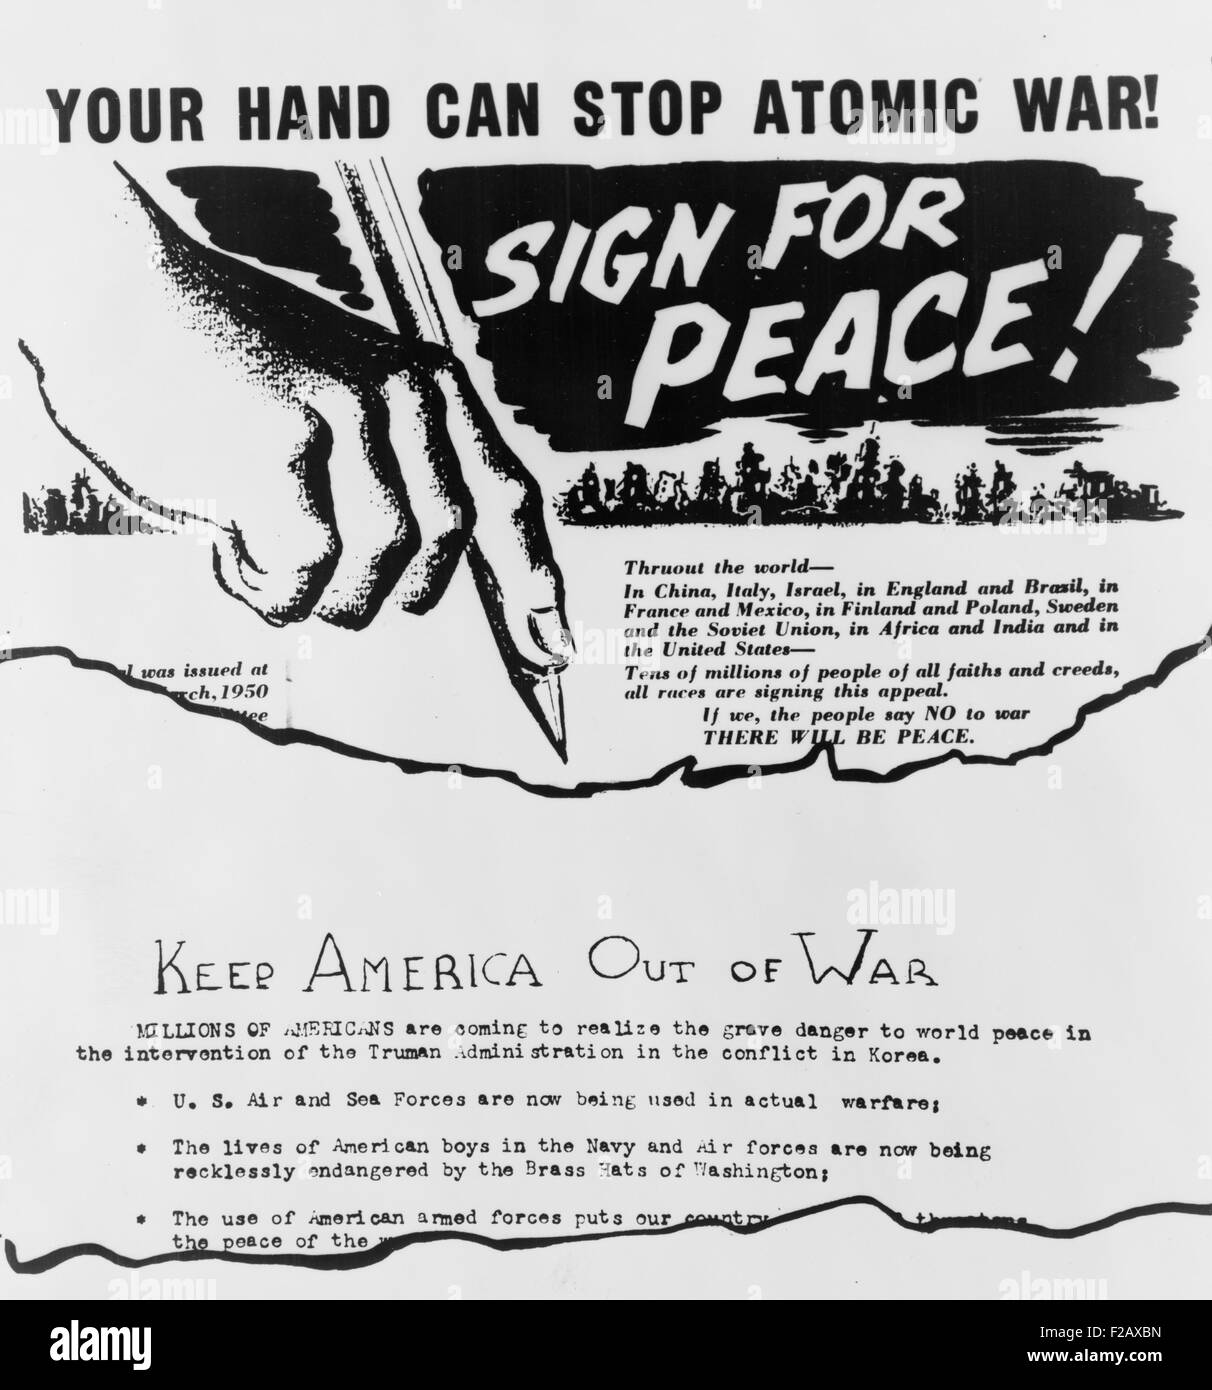 Anti-war leaflet and petition distributed in Cleveland by American Communists in 1950. (BSLOC 2015 2 35) Stock Photo